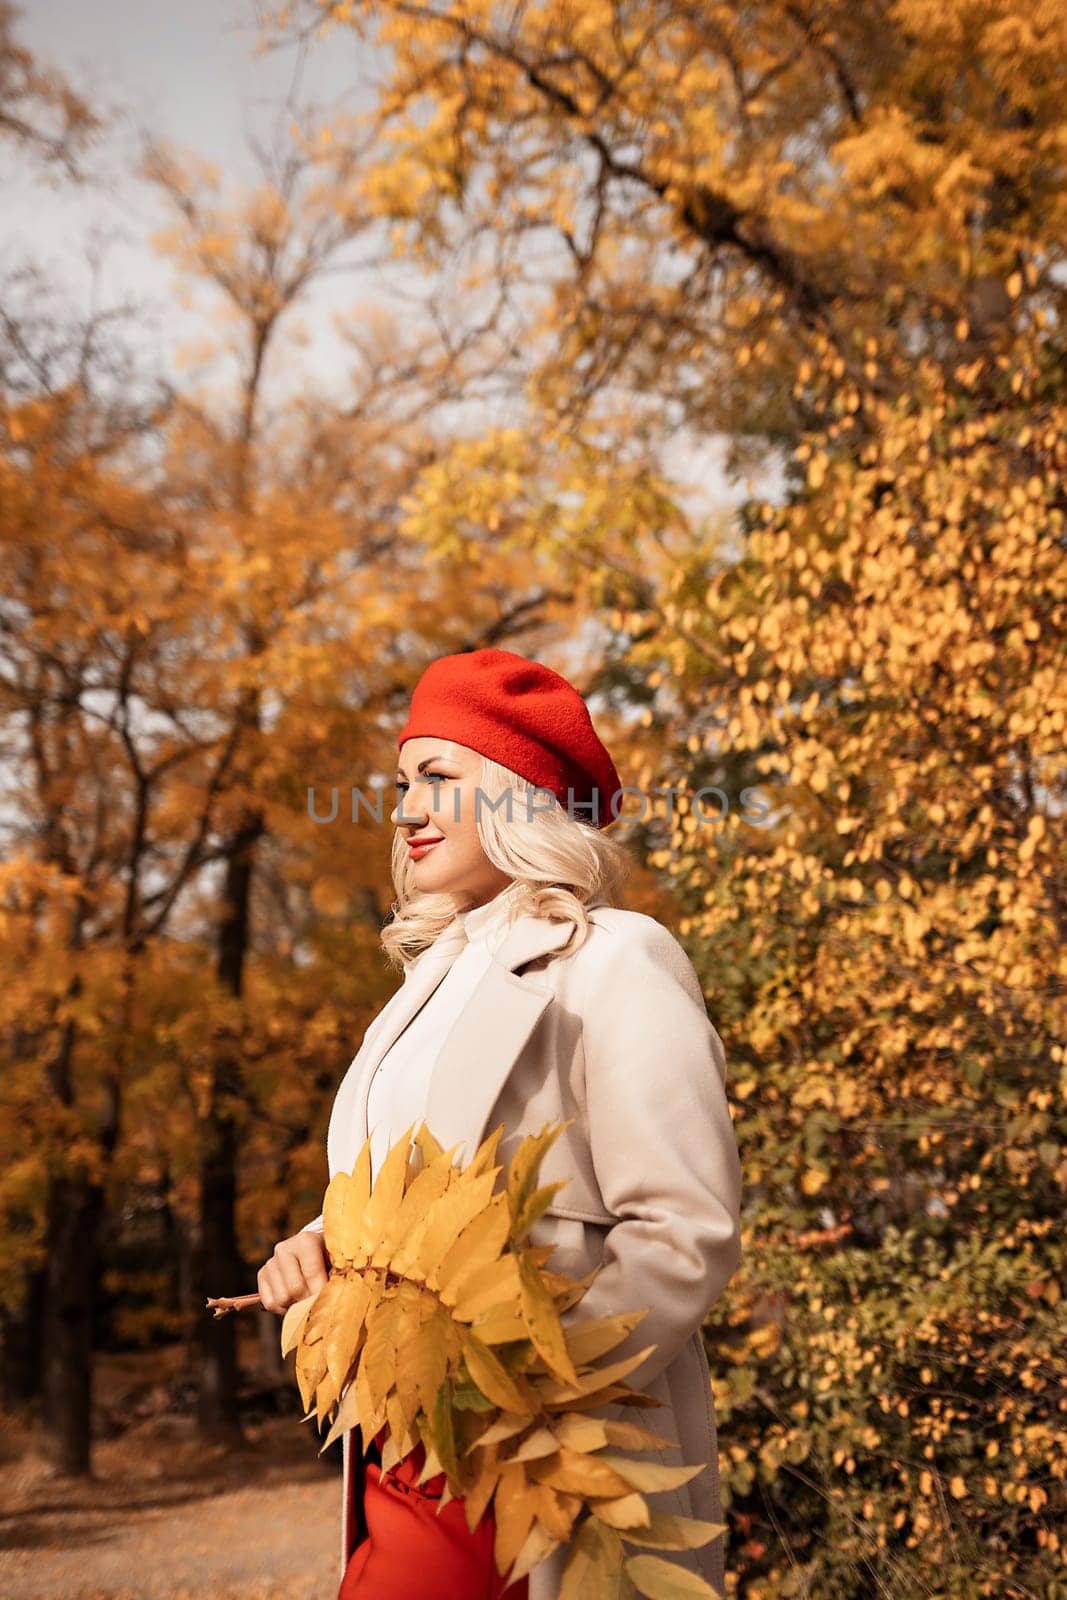 autumn woman in a red beret, a light coat and a red skirt, against the backdrop of an autumn park with yellow leaves in her hands.